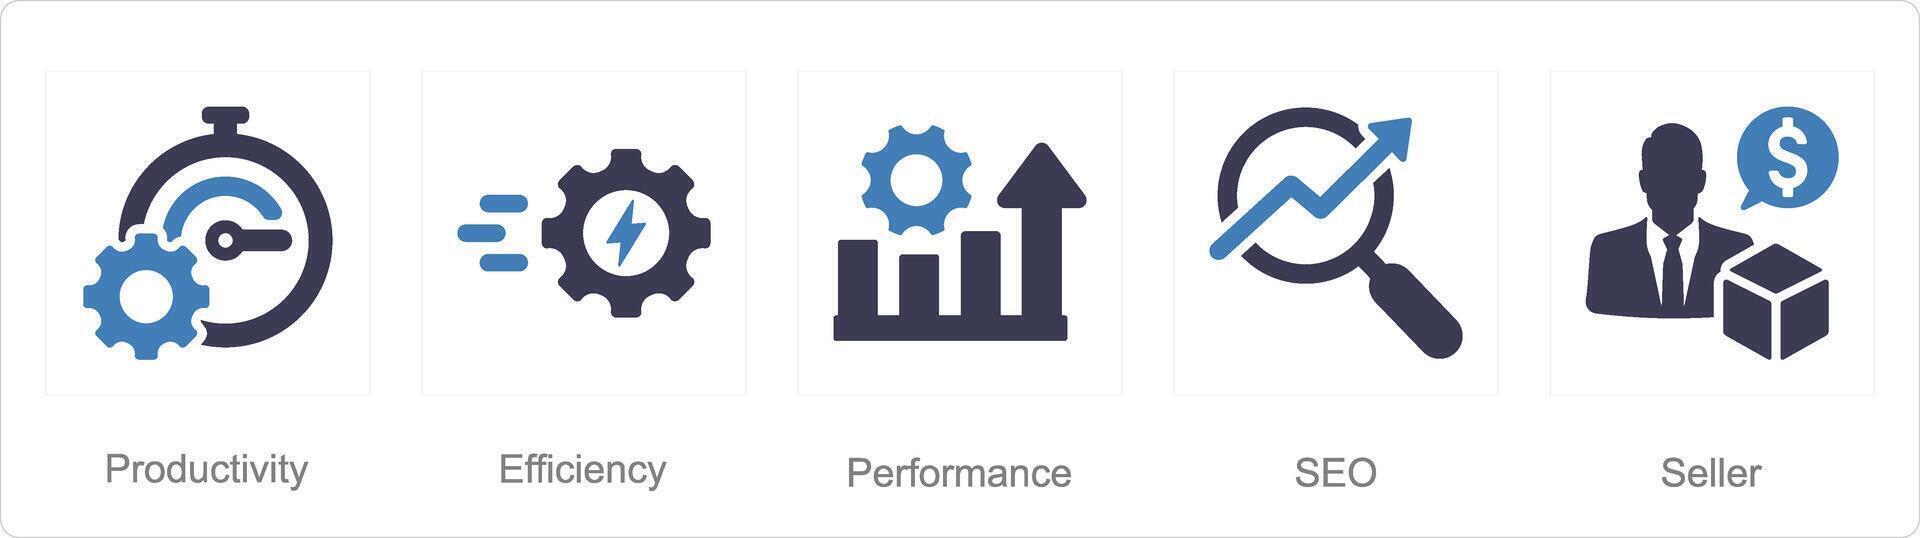 A set of 5 Increase Sale icons as productivity, efficiency, performance vector